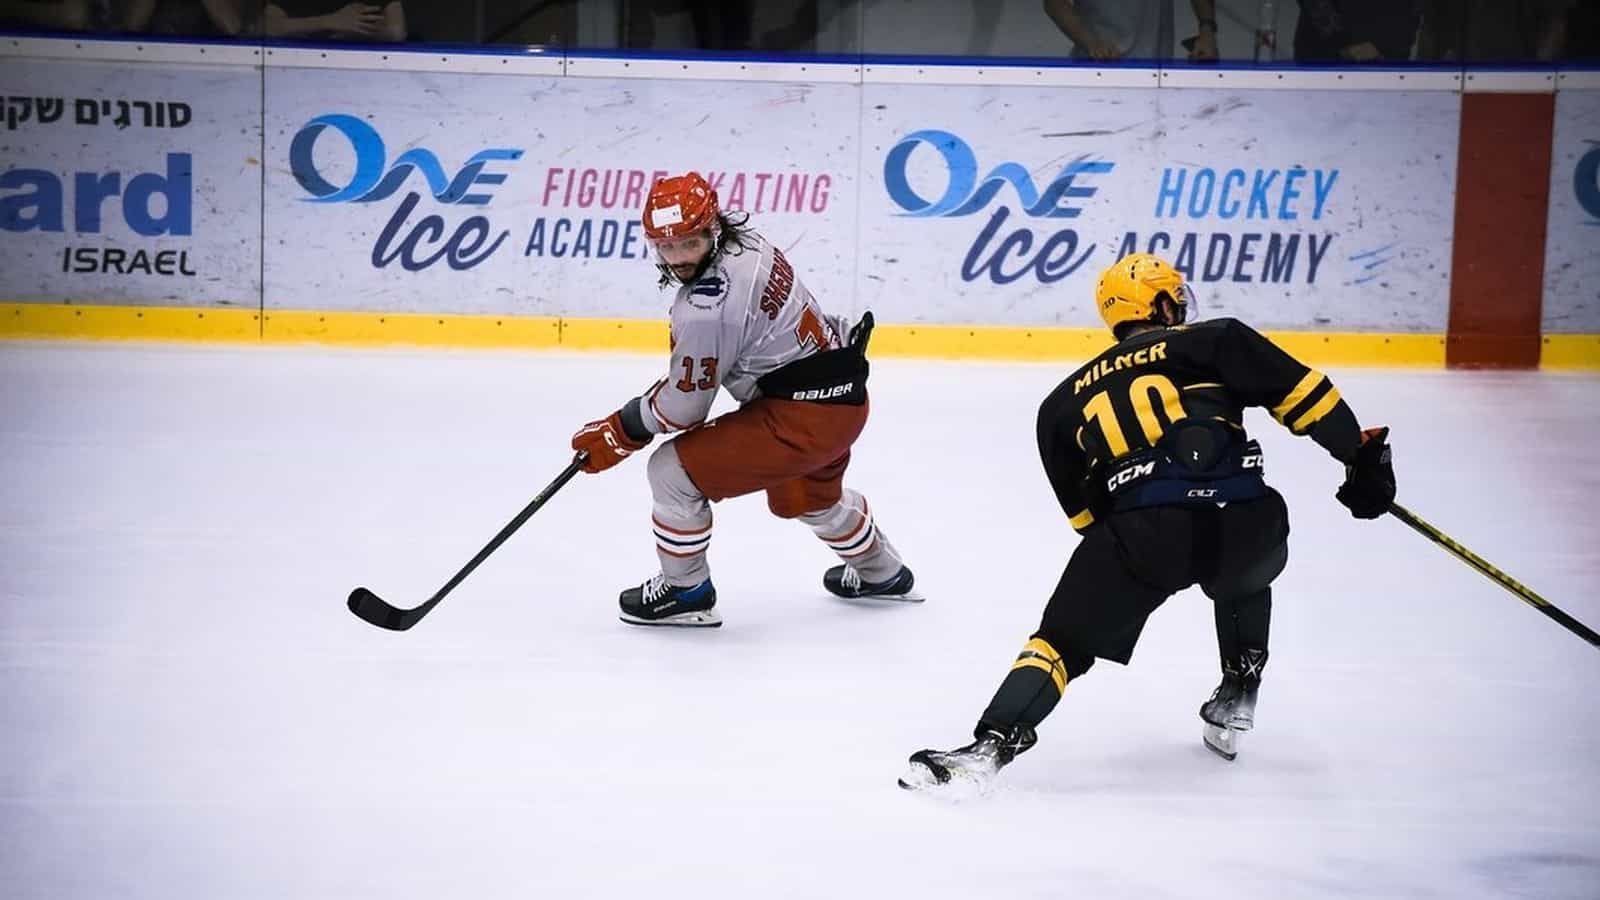 Ice hockey players from abroad glide into Israel - ISRAEL21c